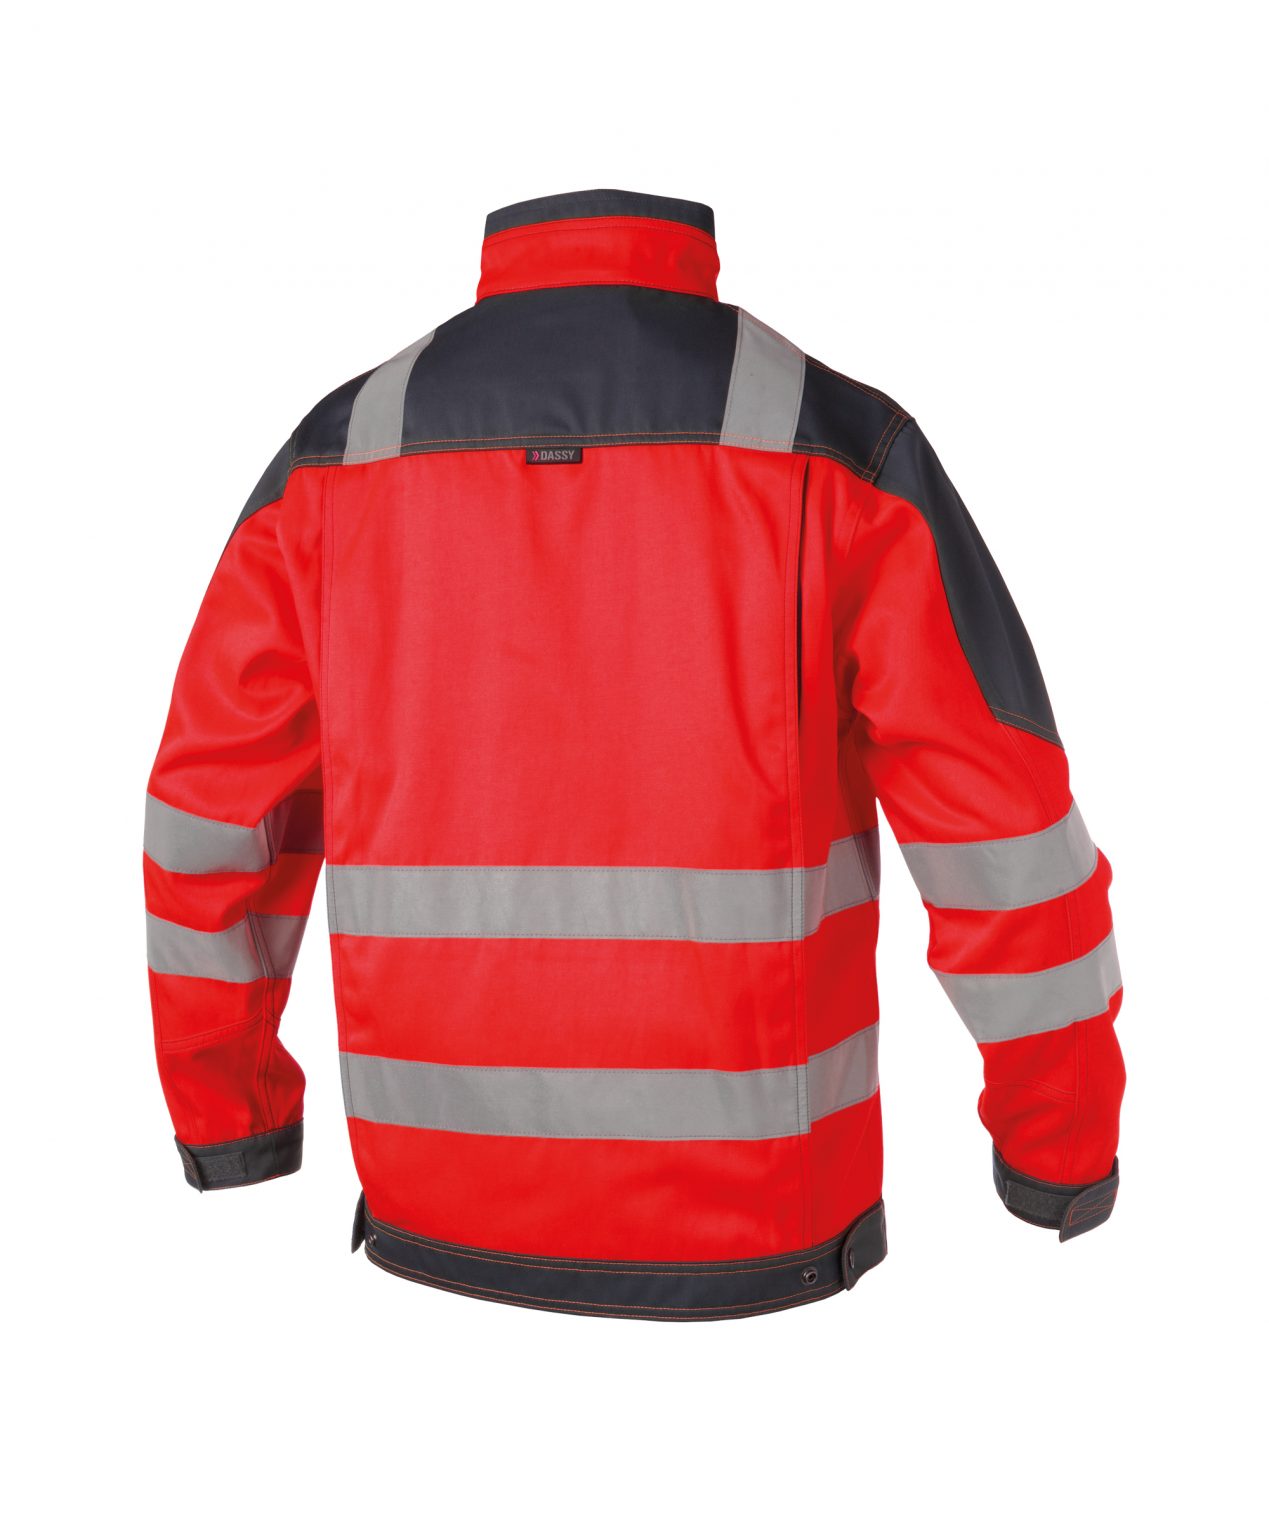 orlando high visibility work jacket fluo red cement grey back